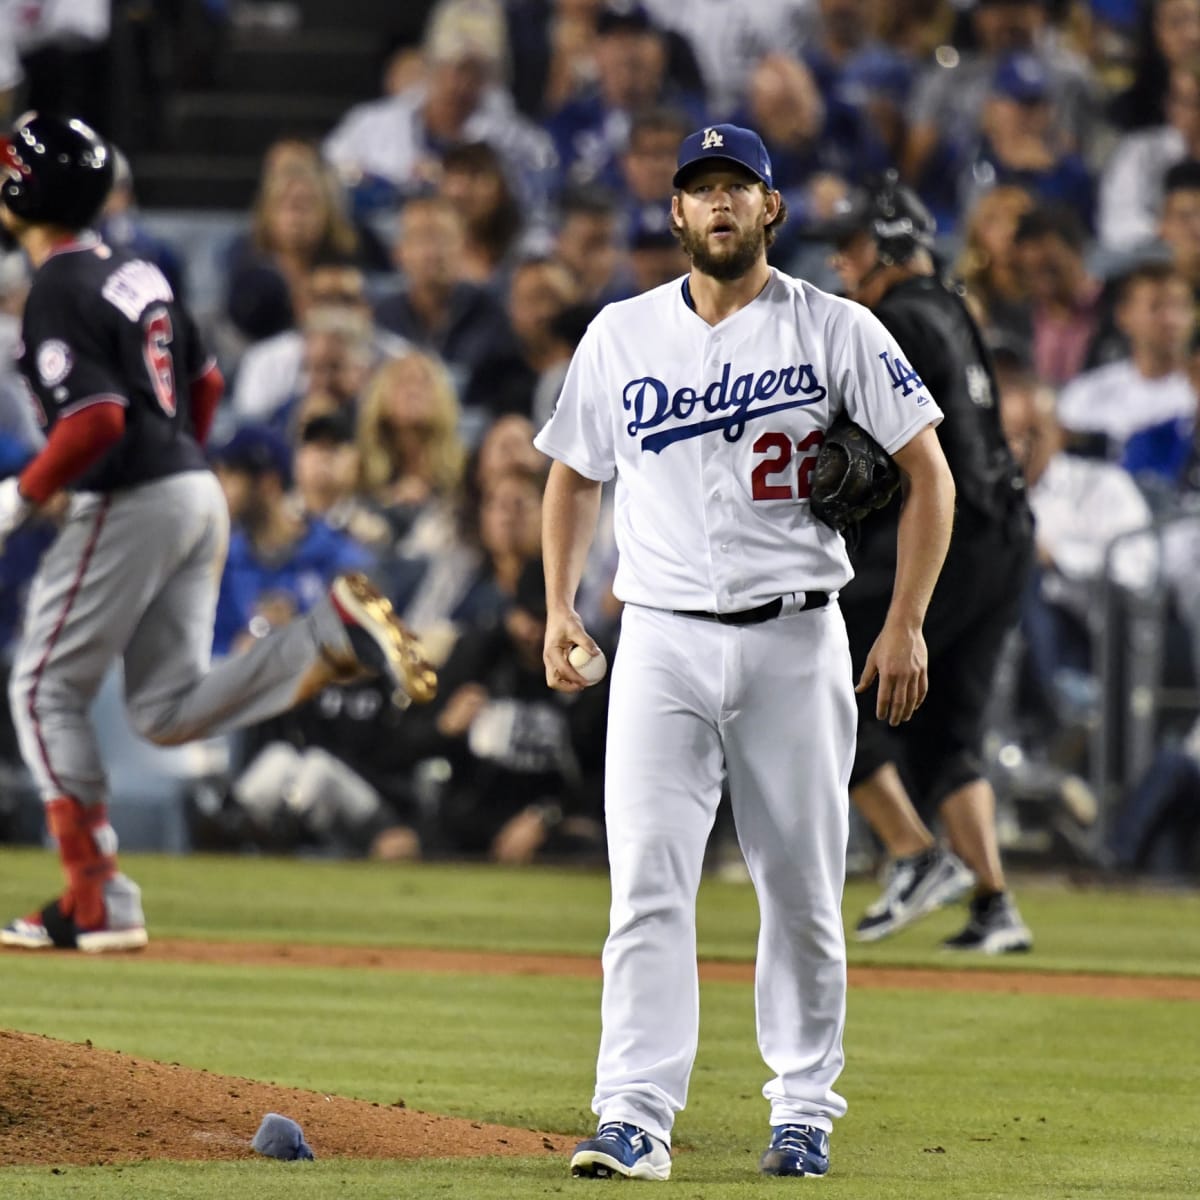 As Clayton Kershaw tries to pitch his way to October glory, you